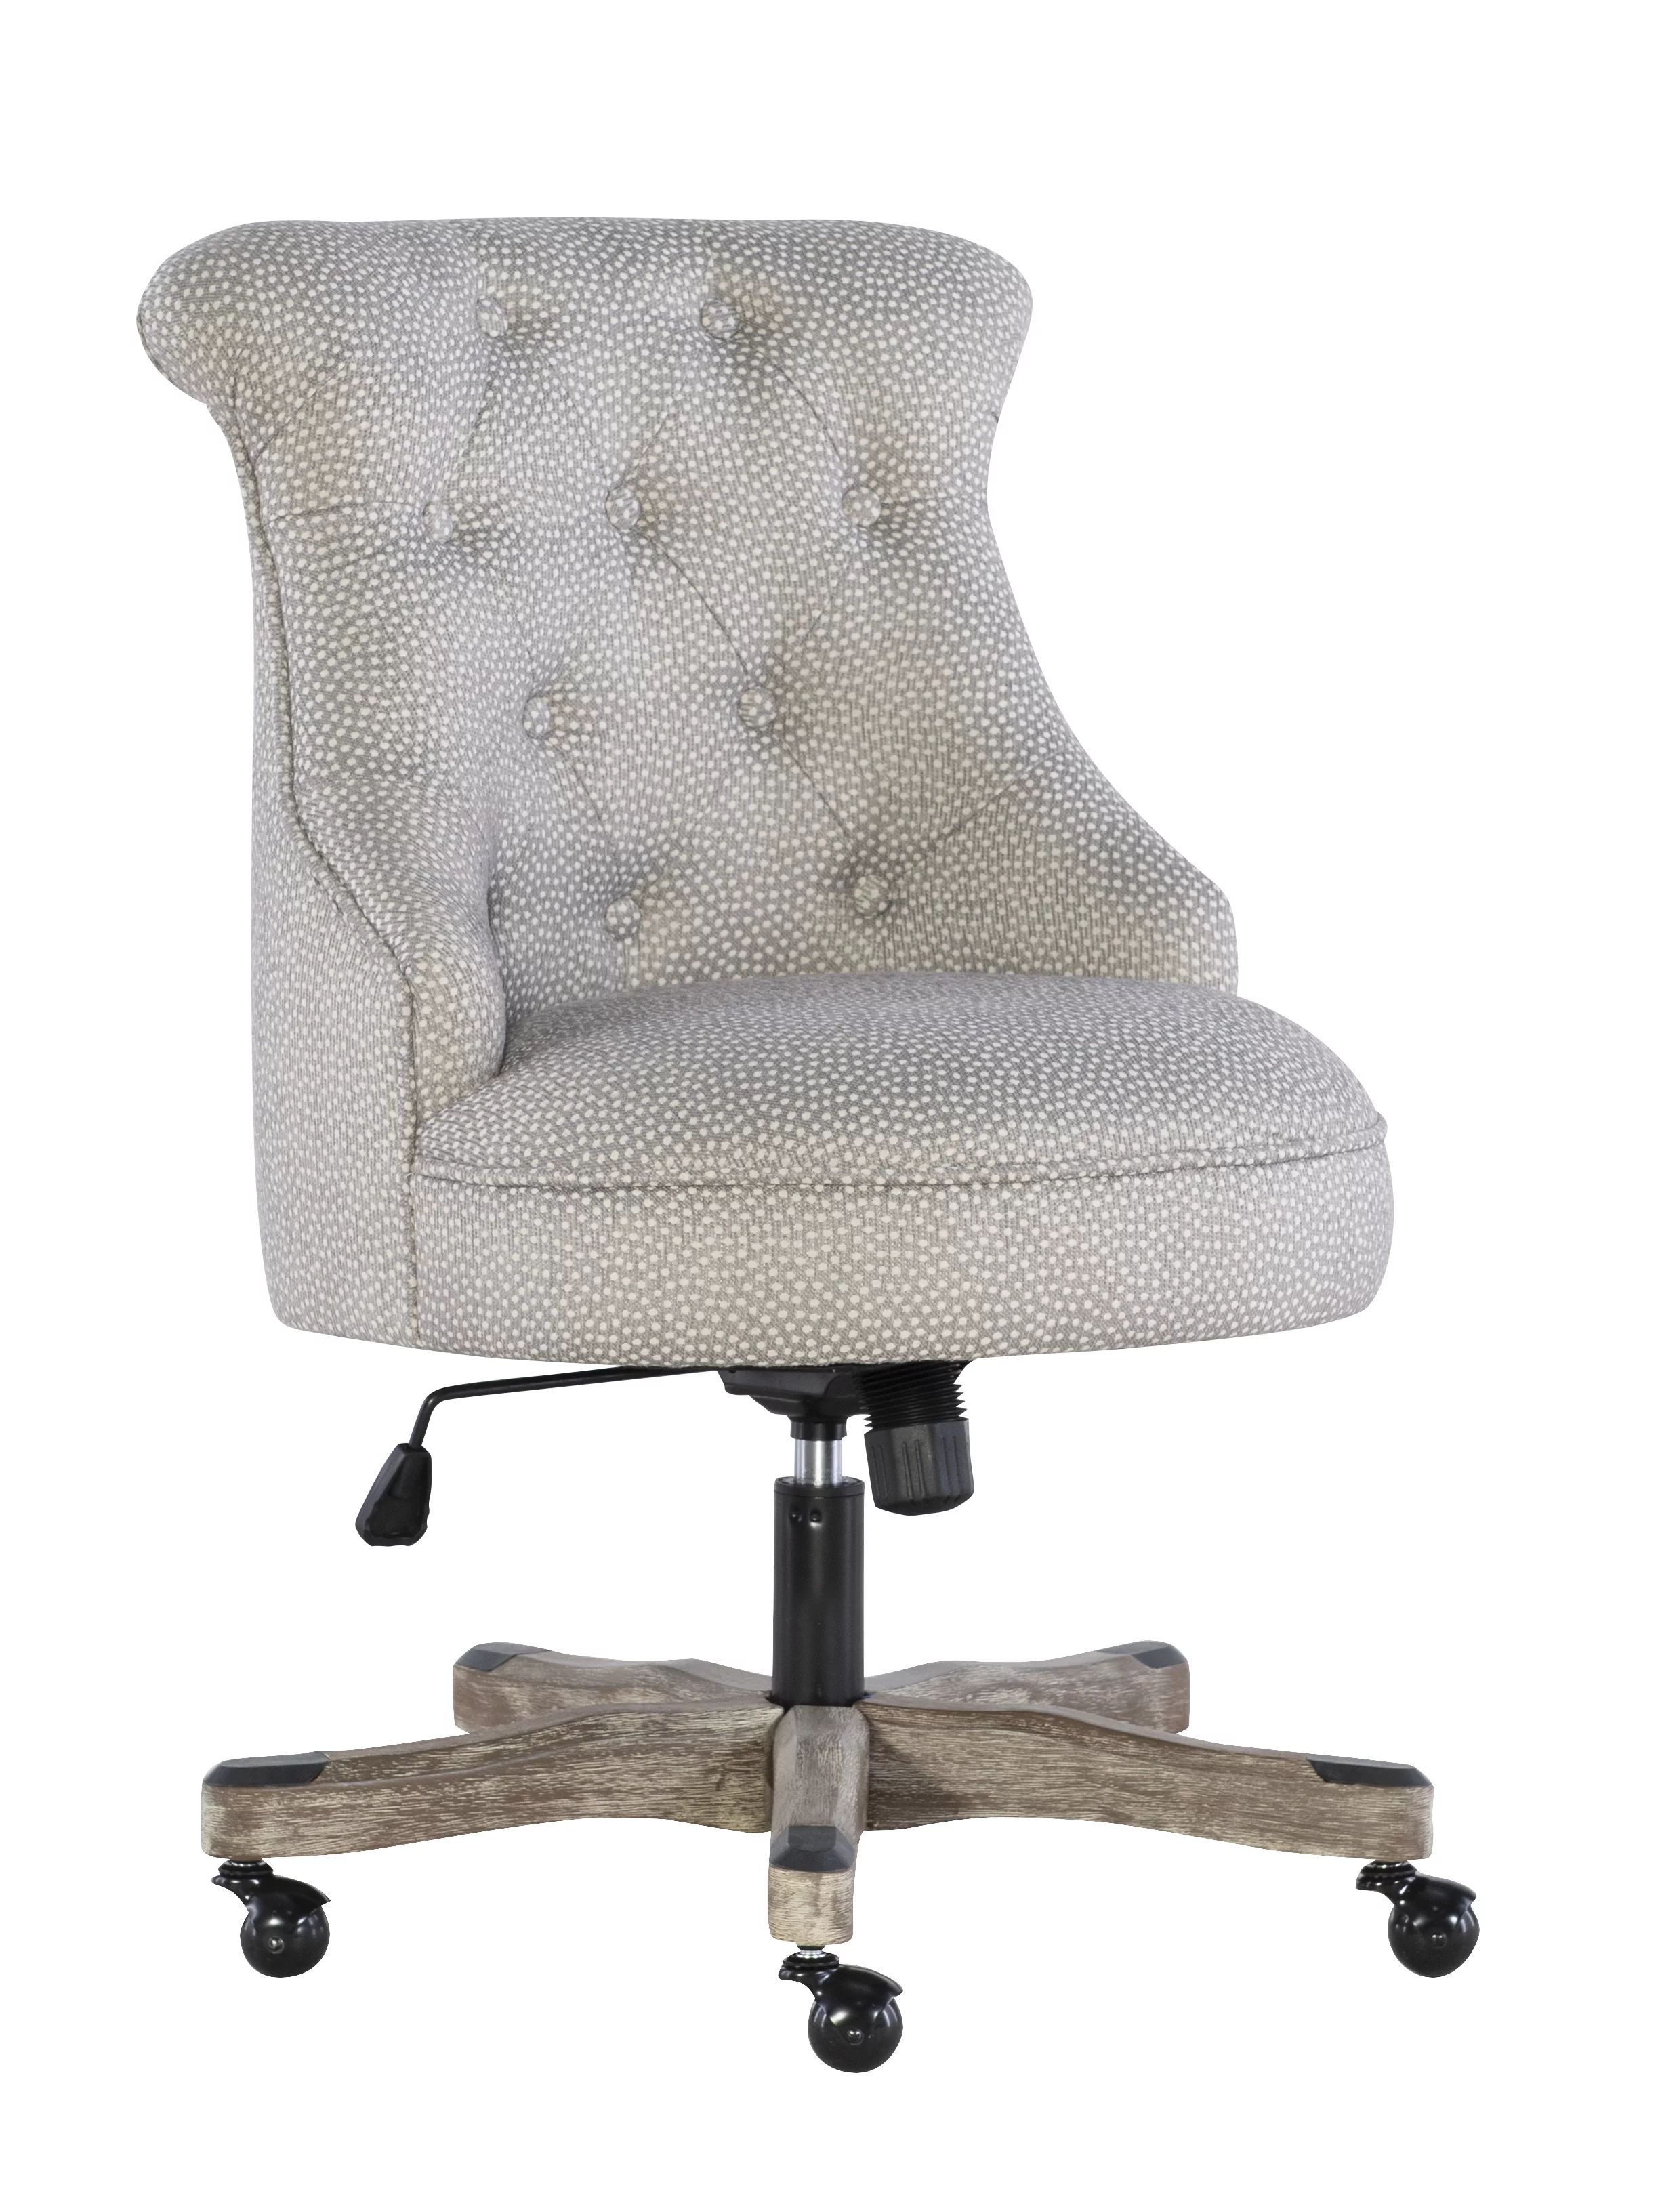 Linon Sinclair Manager's Chair with Adjustable Height & Swivel, 275 lb. Capacity, Light Gray | Walmart (US)